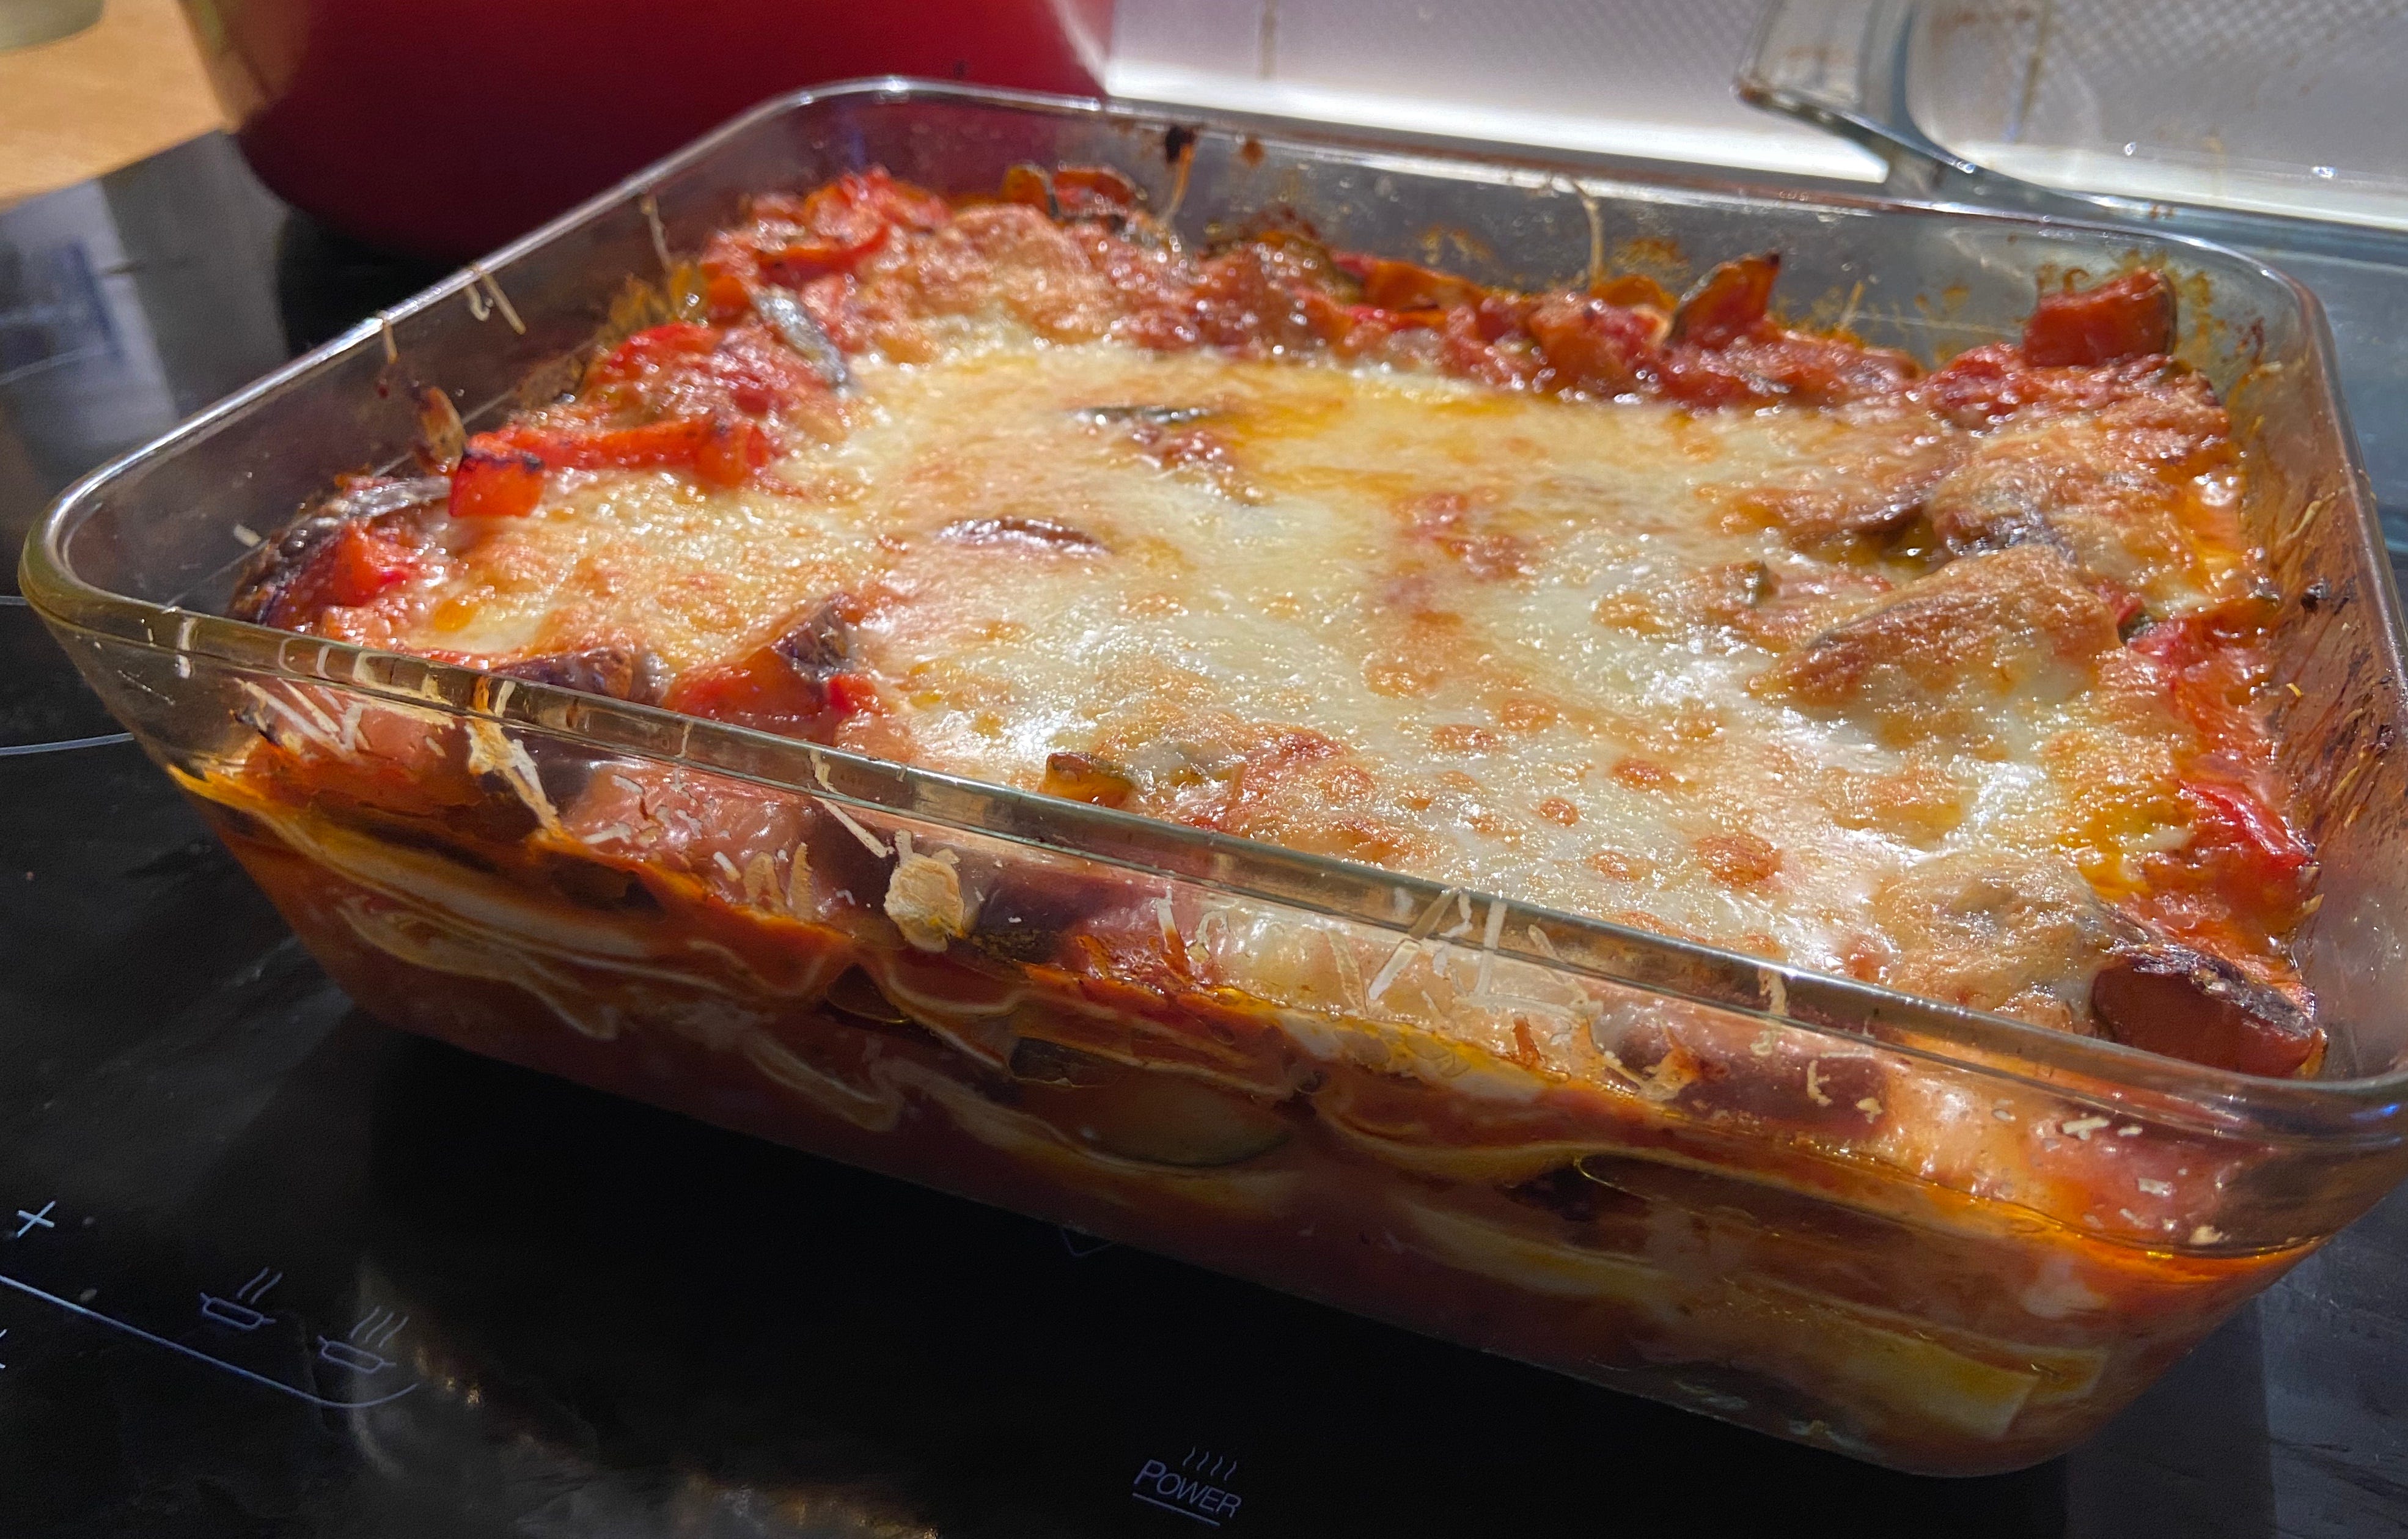 Cheese (vegetarian lasagna) - by Mark - Apocalypse Chow